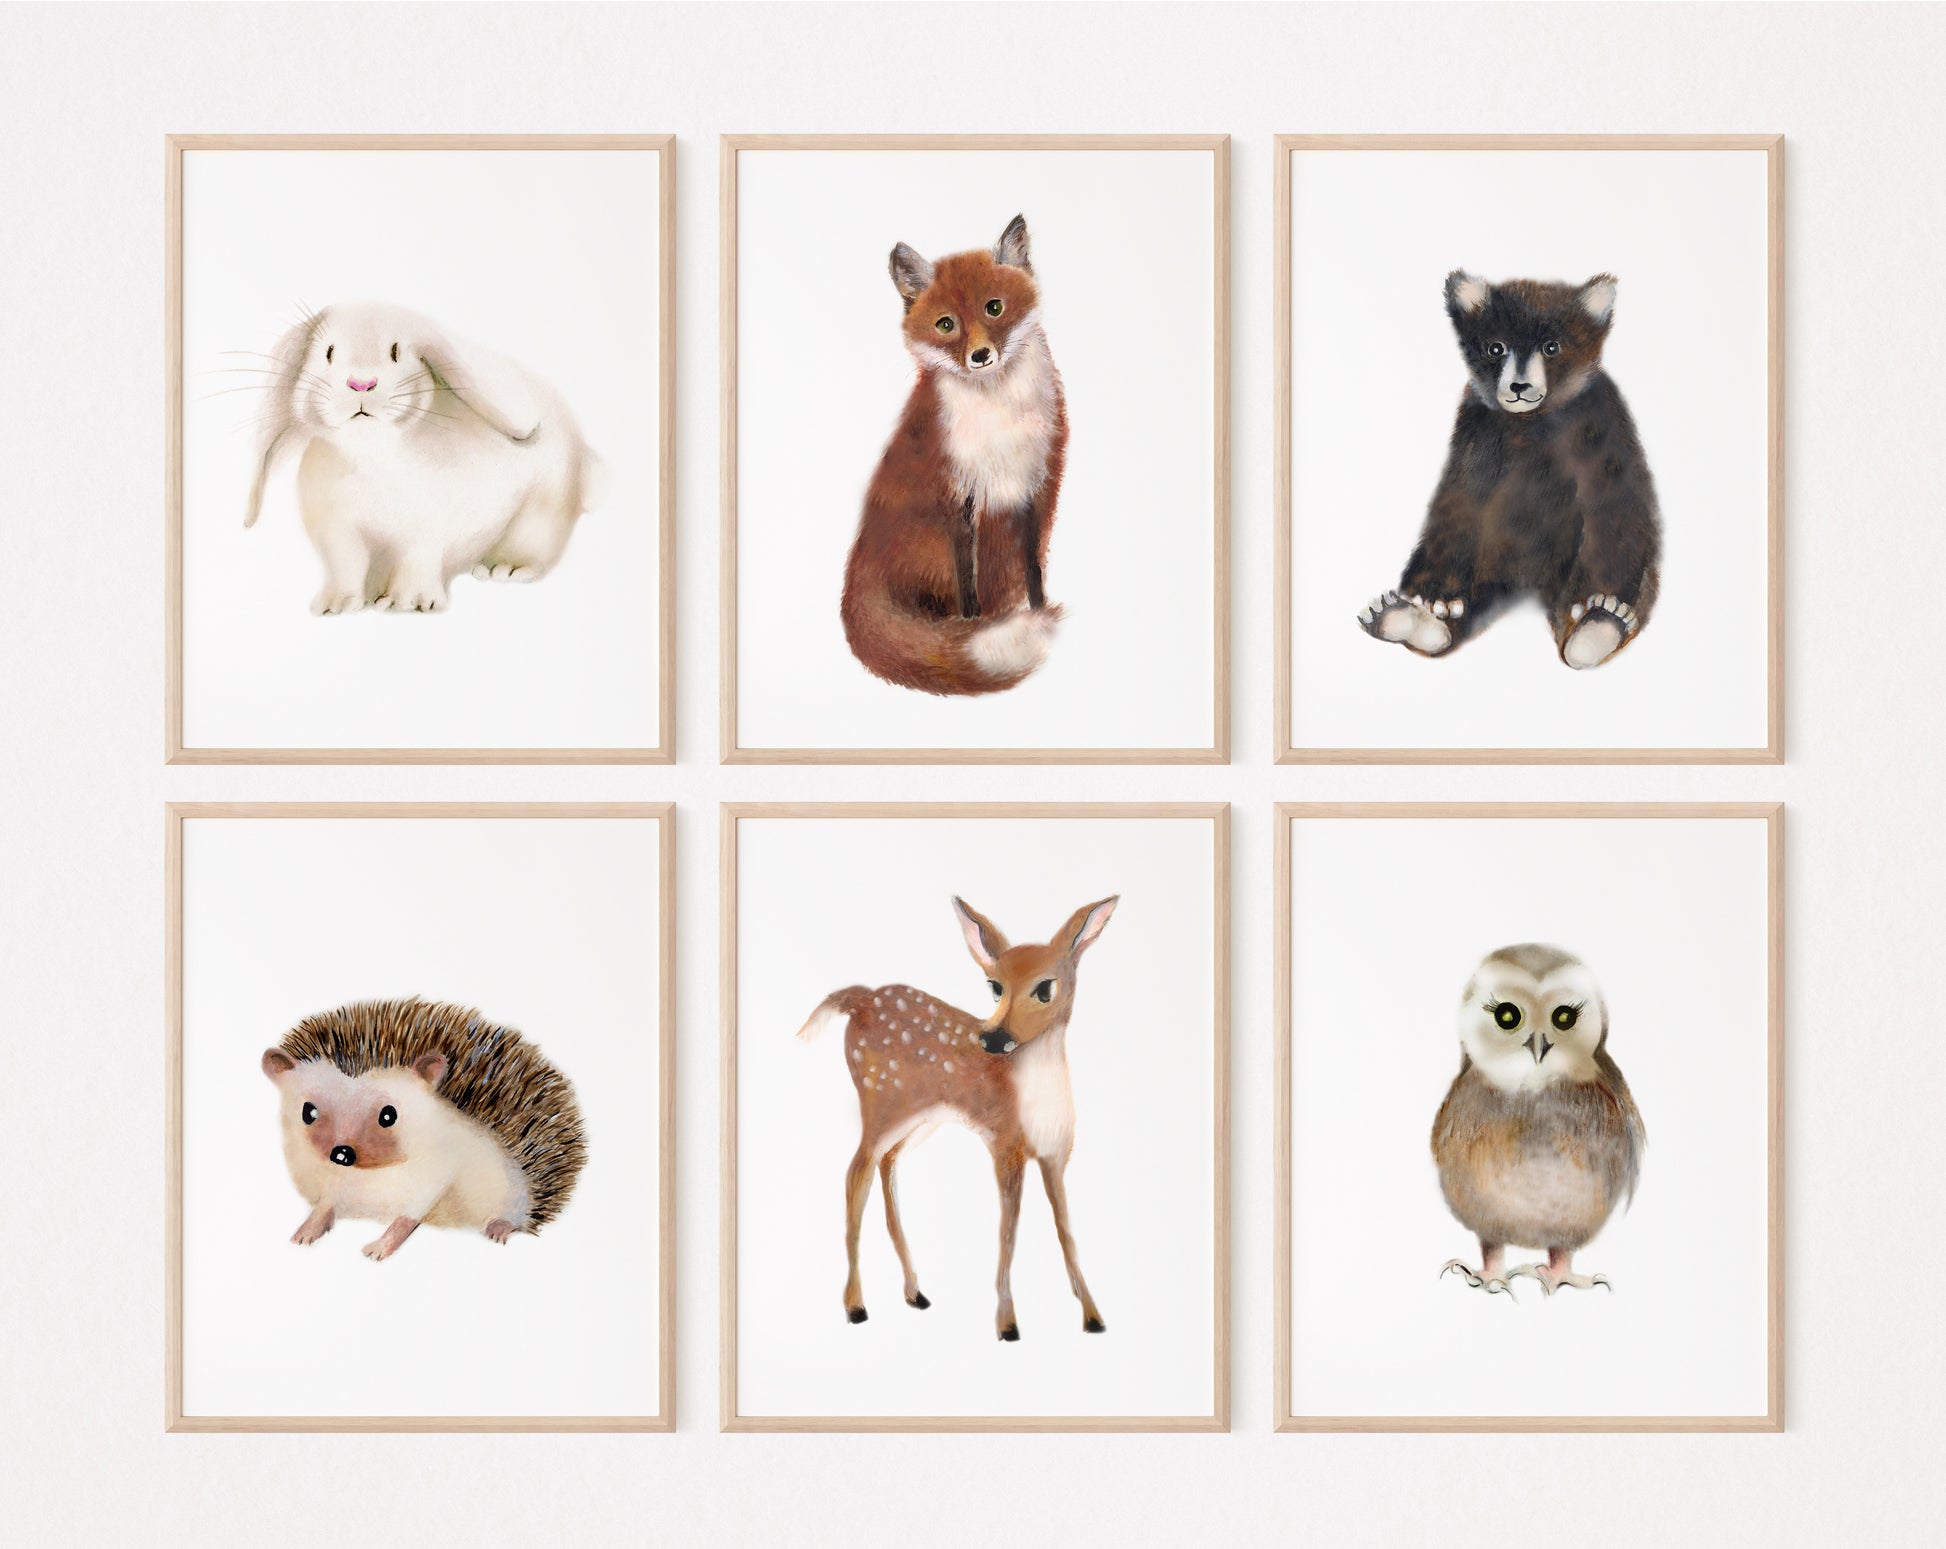 Set of 6 baby woodland animal paintings on white backgrounds shown in frames  - Studio Q - Art by Nicky Quartermaine Scott